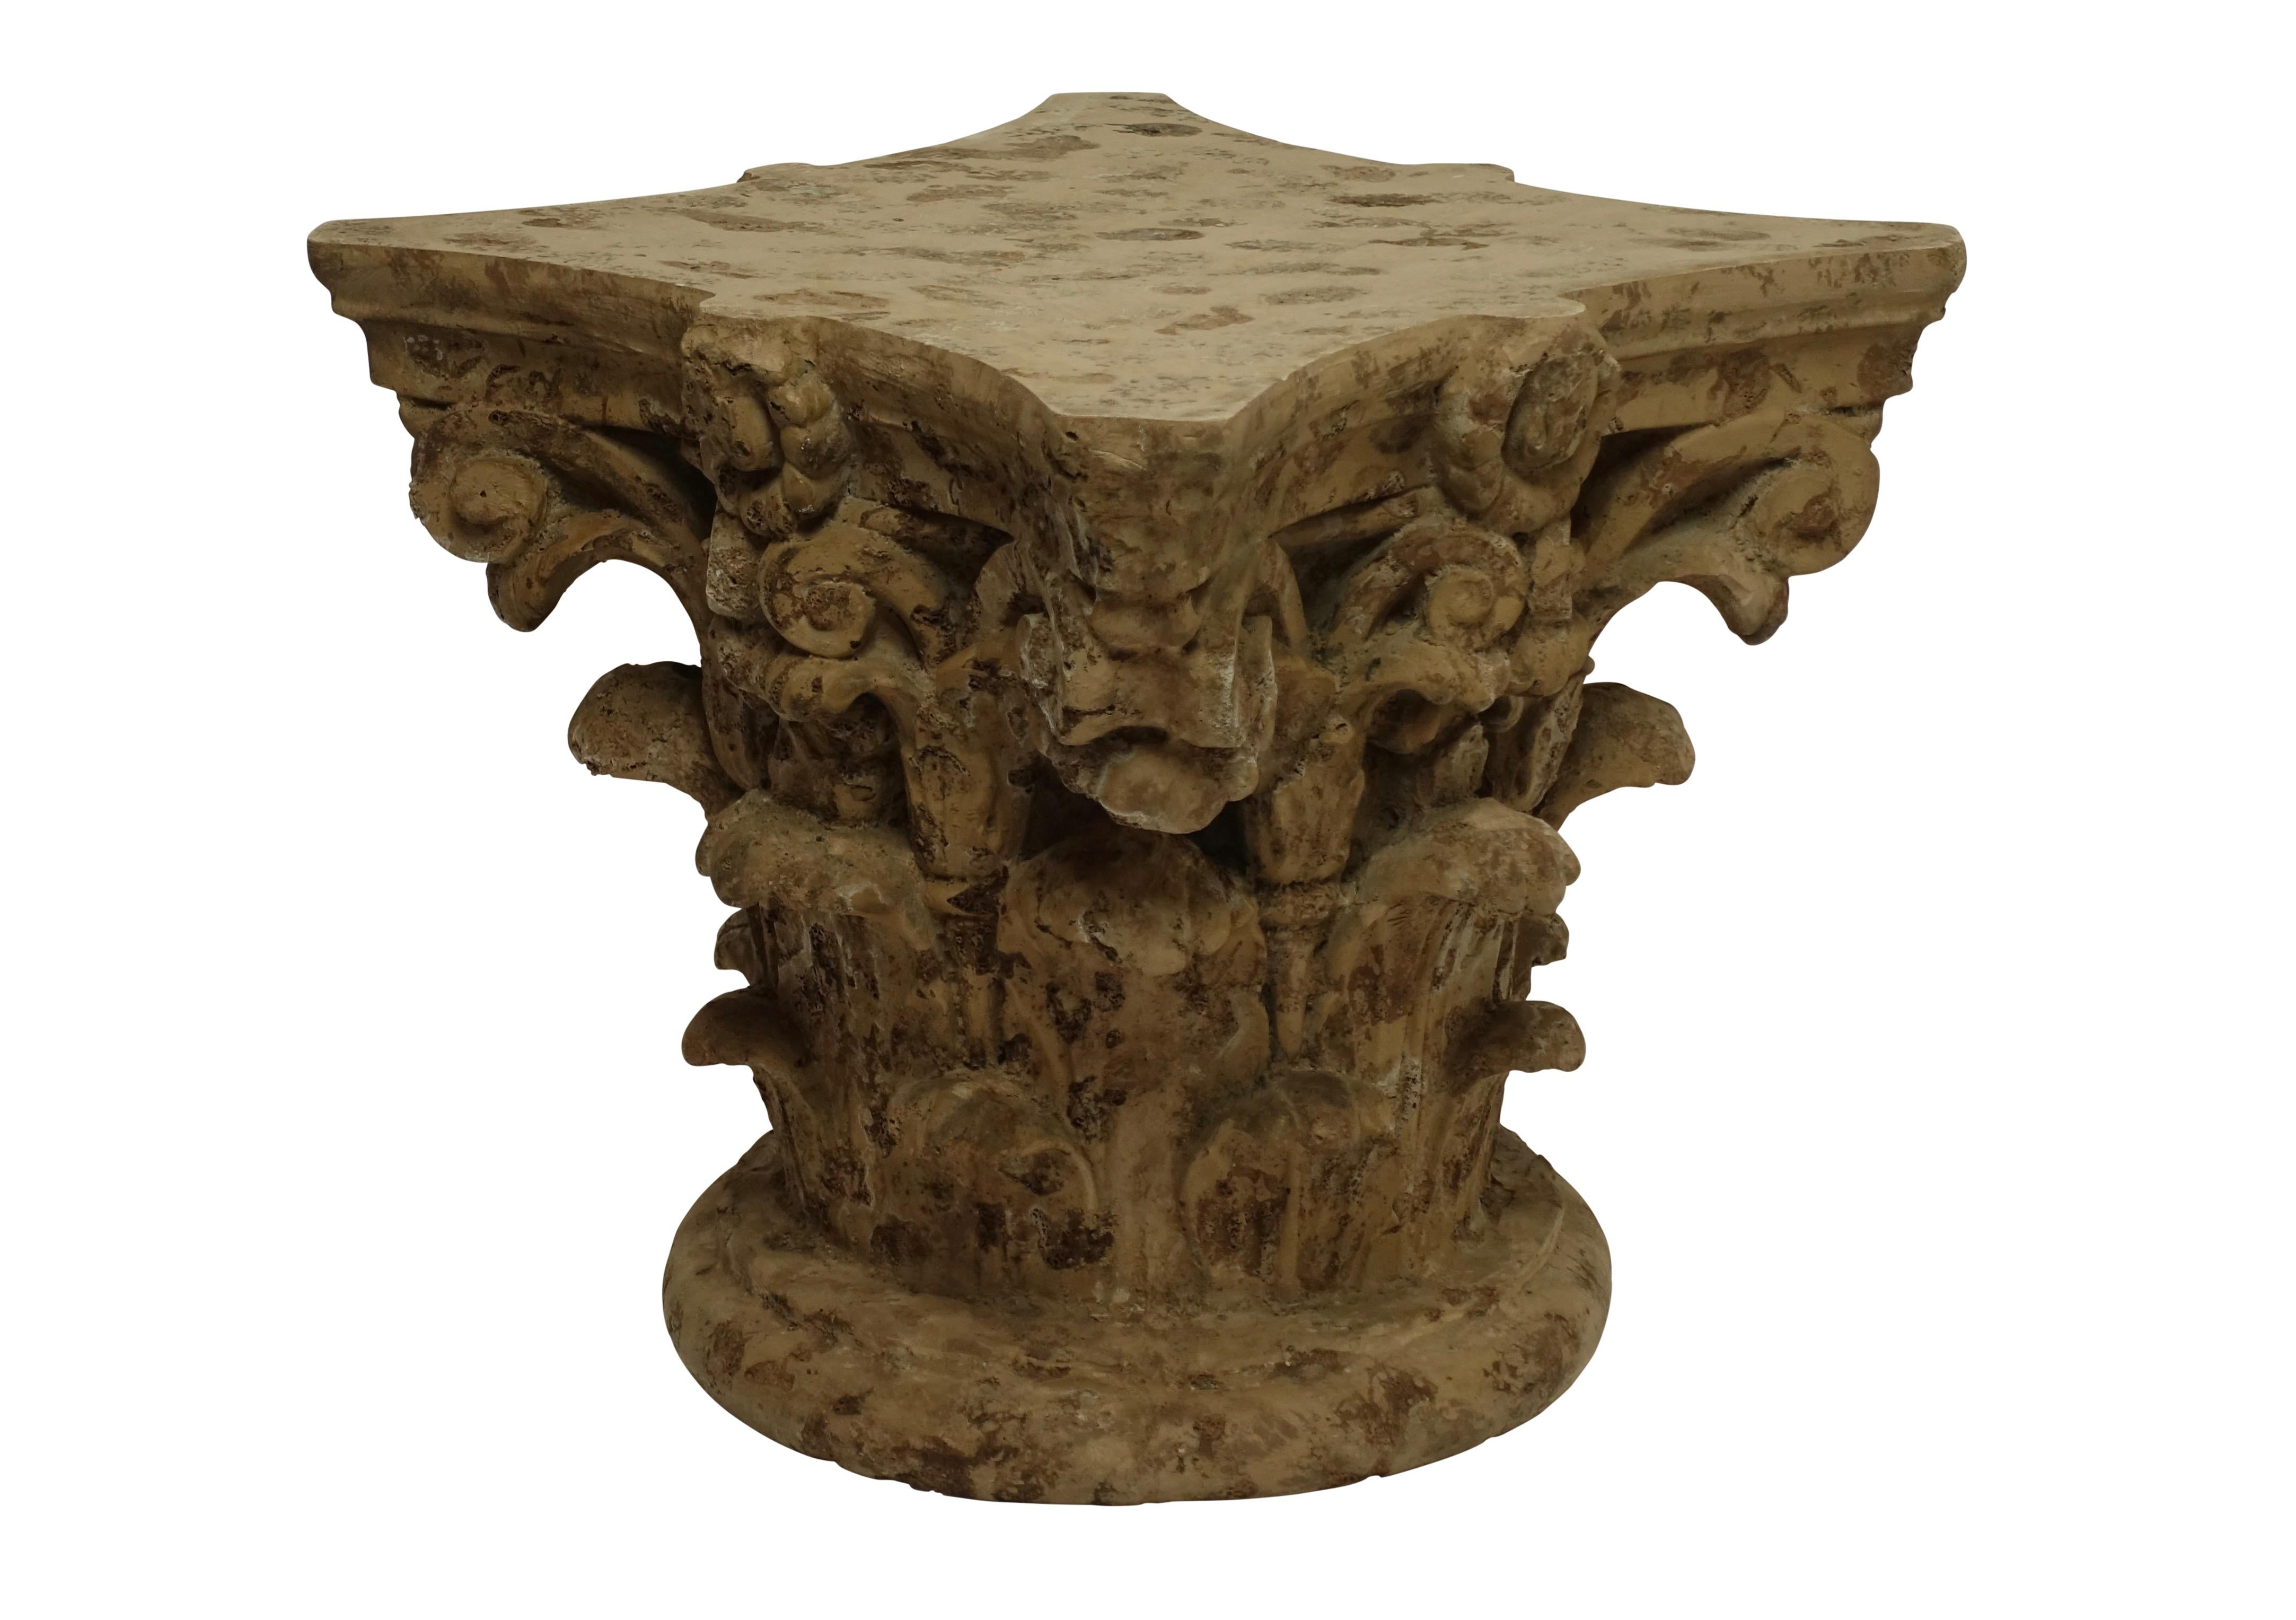 This low table is made of molded fiberglass and painted to look like the ruins of an ancient capital from a Corinthian/Ionic mix column, in the manner of a Michael Taylor design. American, mid to late 20th century. 
There are two available, sold